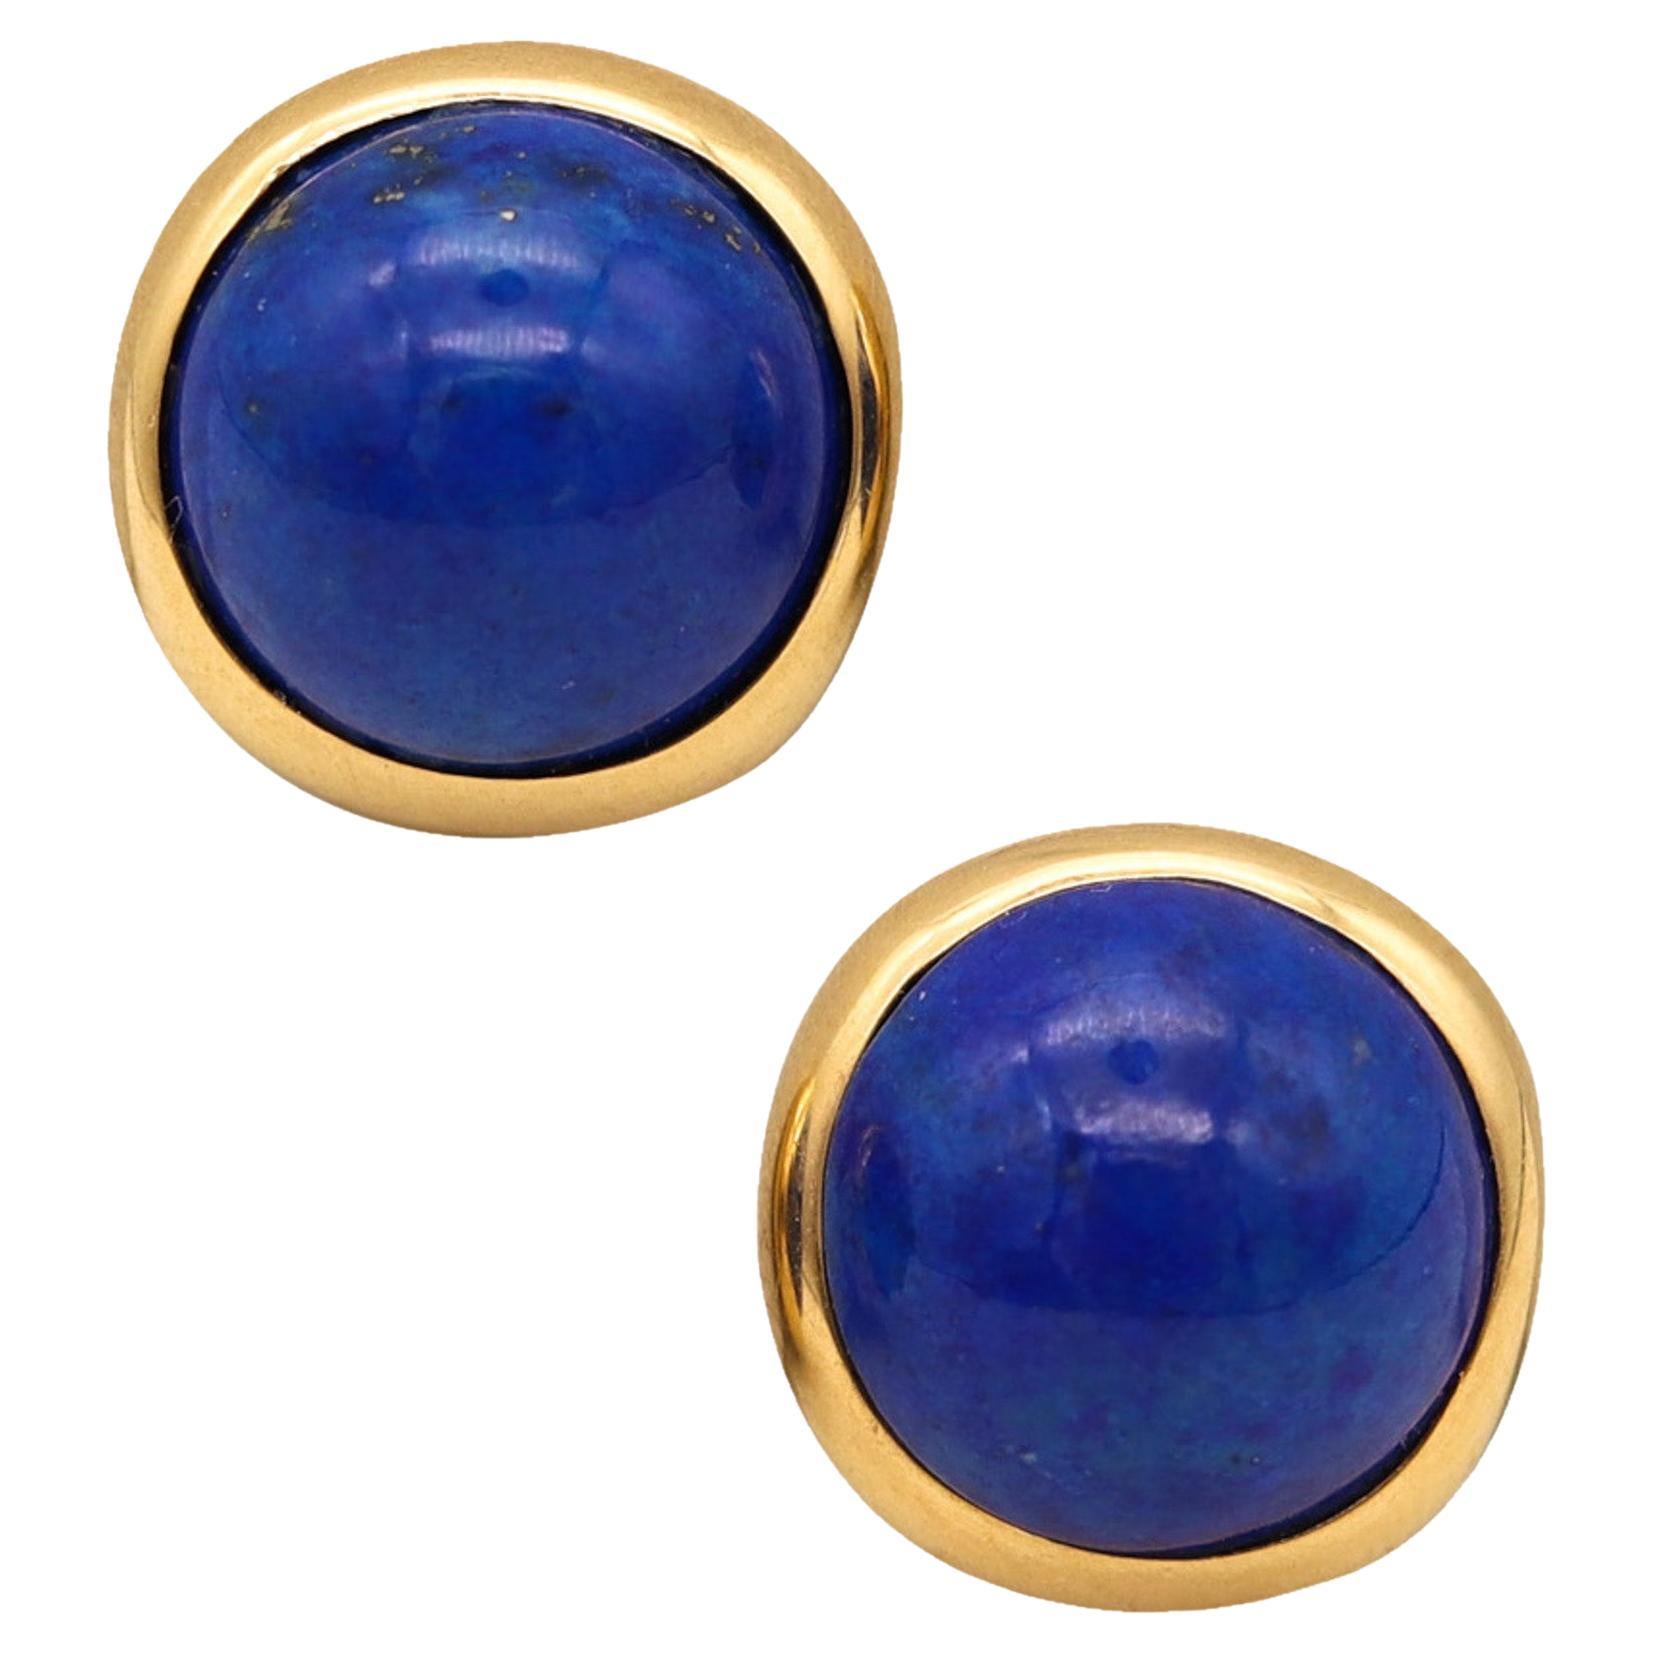 Tiffany & Co. 1980 Peretti Clips on Earrings in 18 Karat Gold with Lapis Lazuli